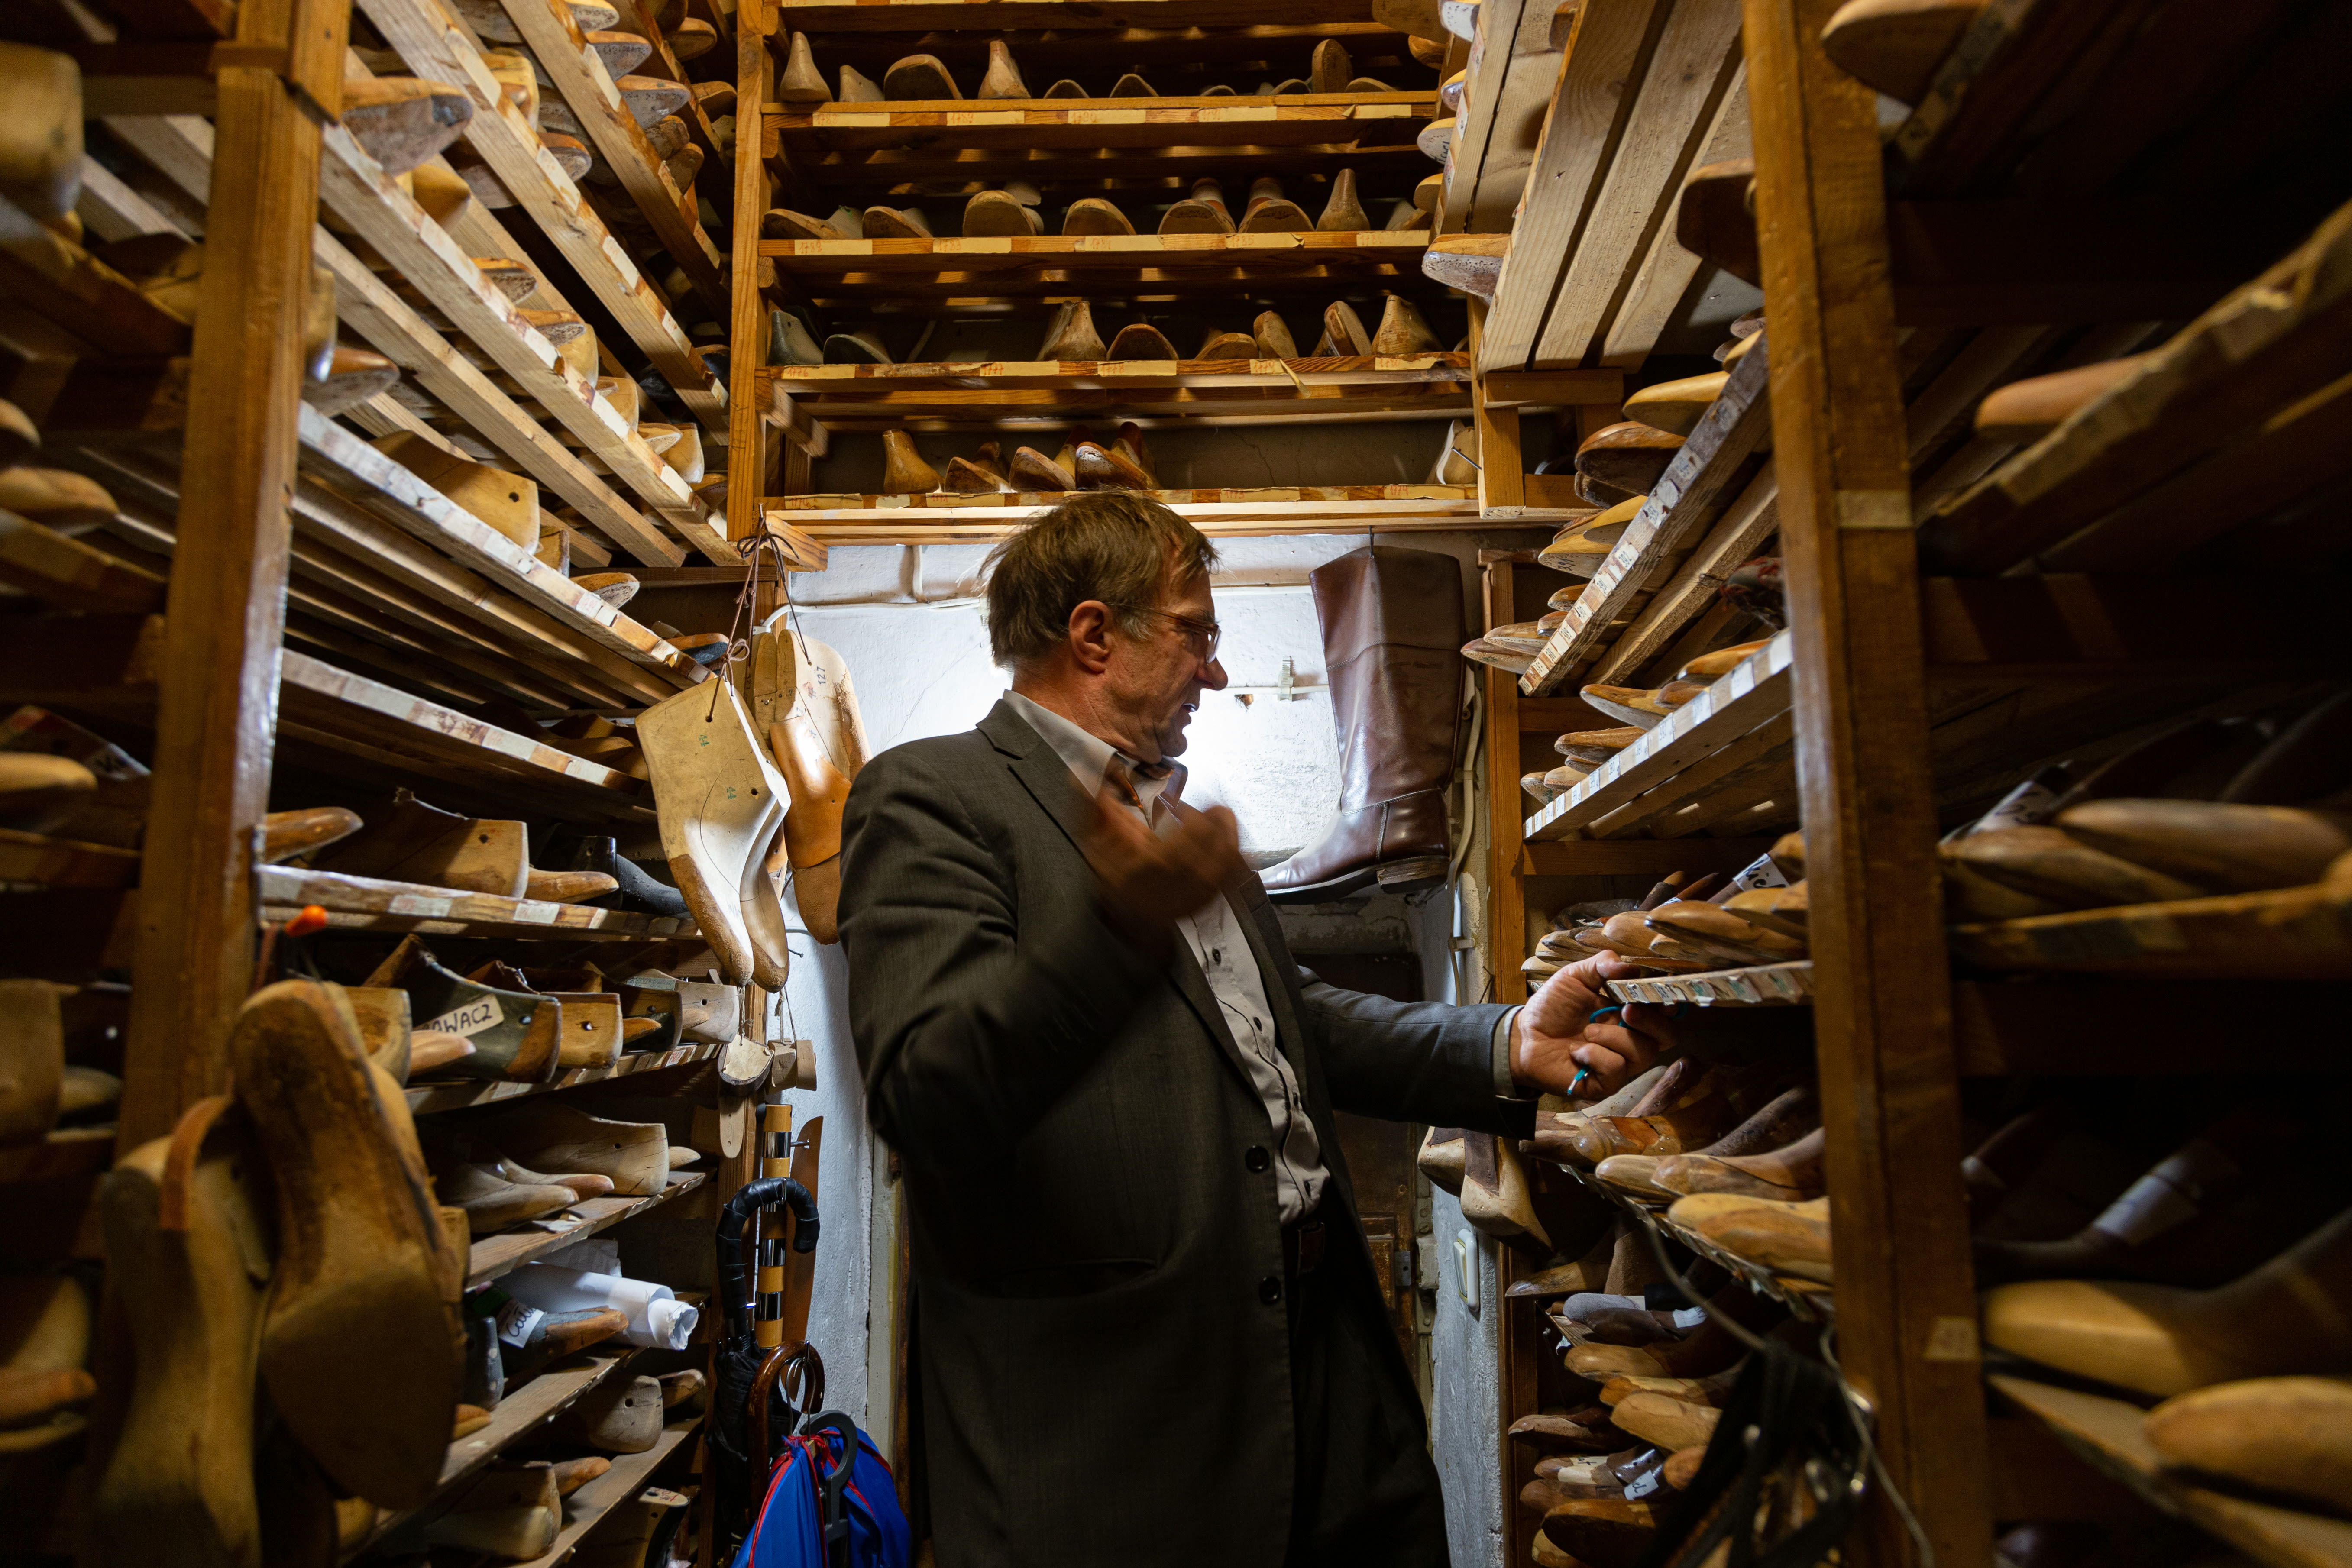 Jackek Kaminski, a Polish present-day shoe artisan, stand in a grey suit among shelves on either side and above him, all filled with brown wooden shoe molds.